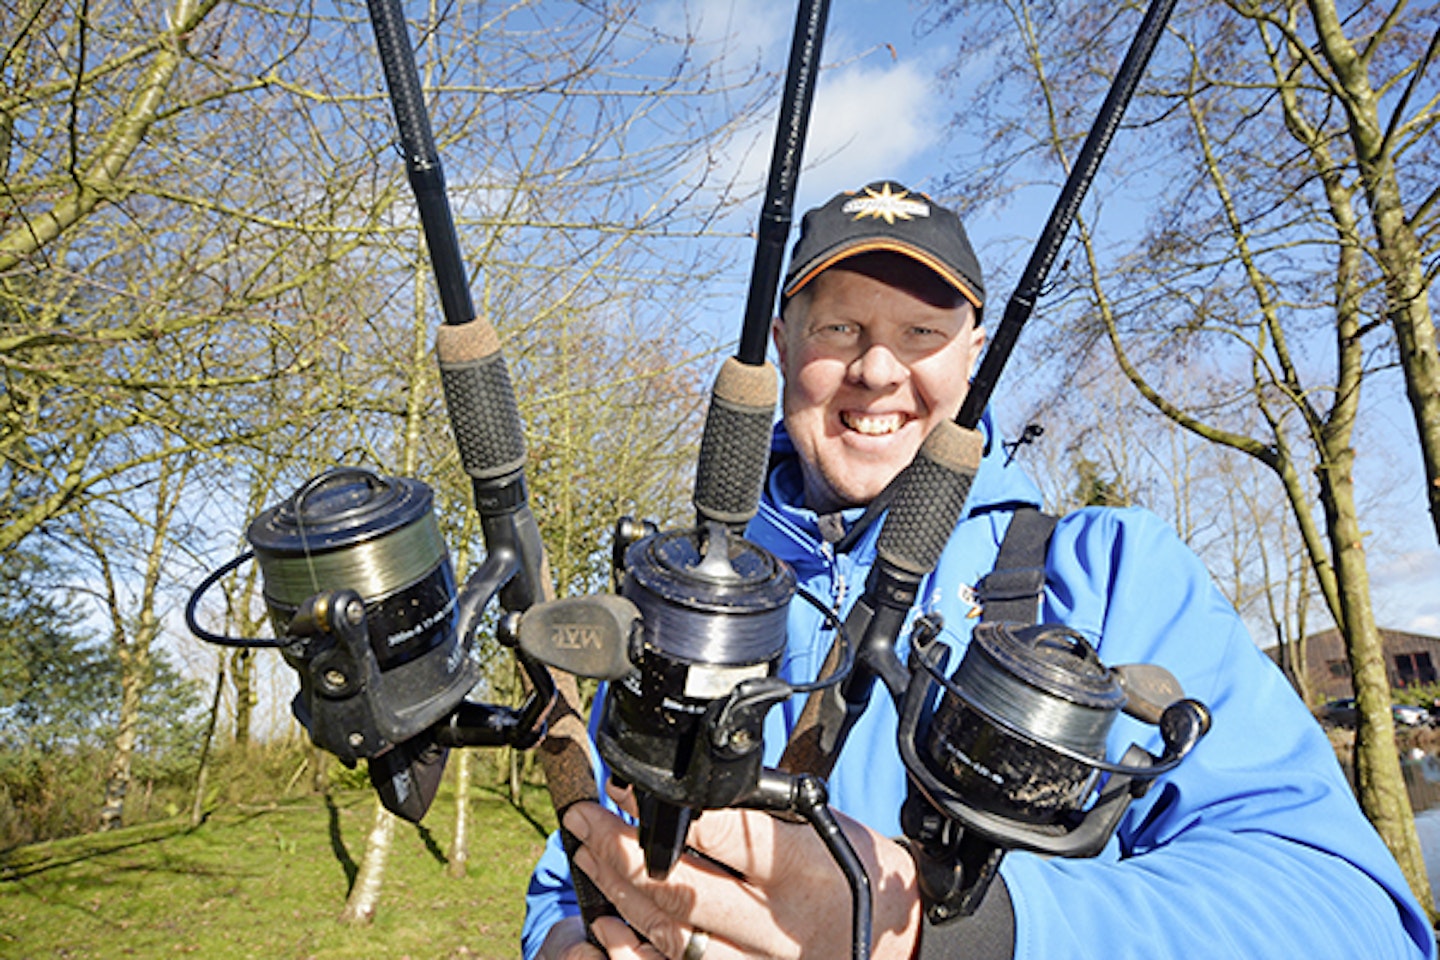 THE BEST FISHING REEL AND ROD COMBINATION